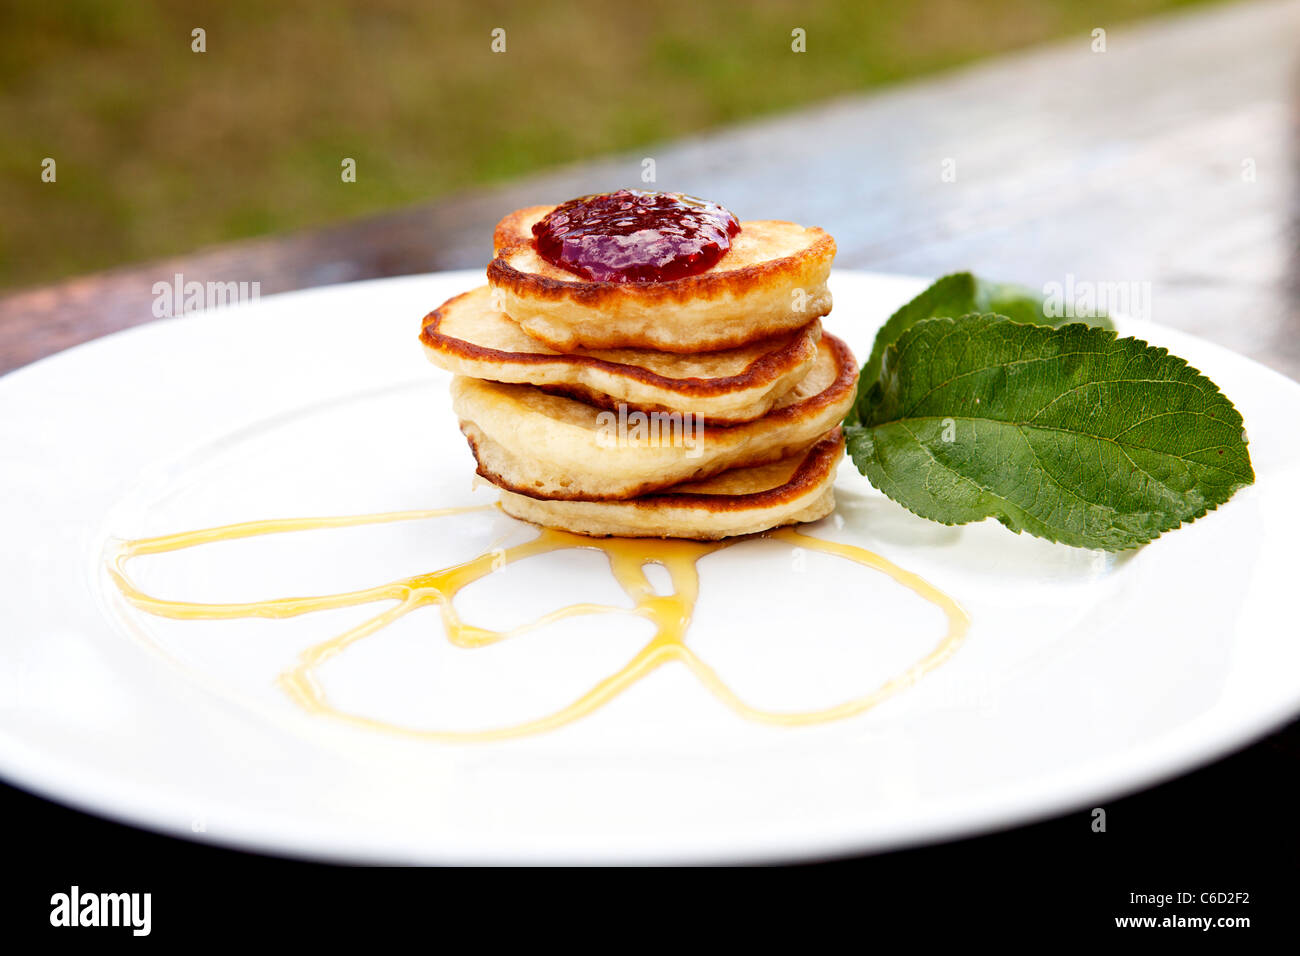 Pancakes On A Plate Covered With Jam And Maple Syrup With Mint On The Side Stock Photo